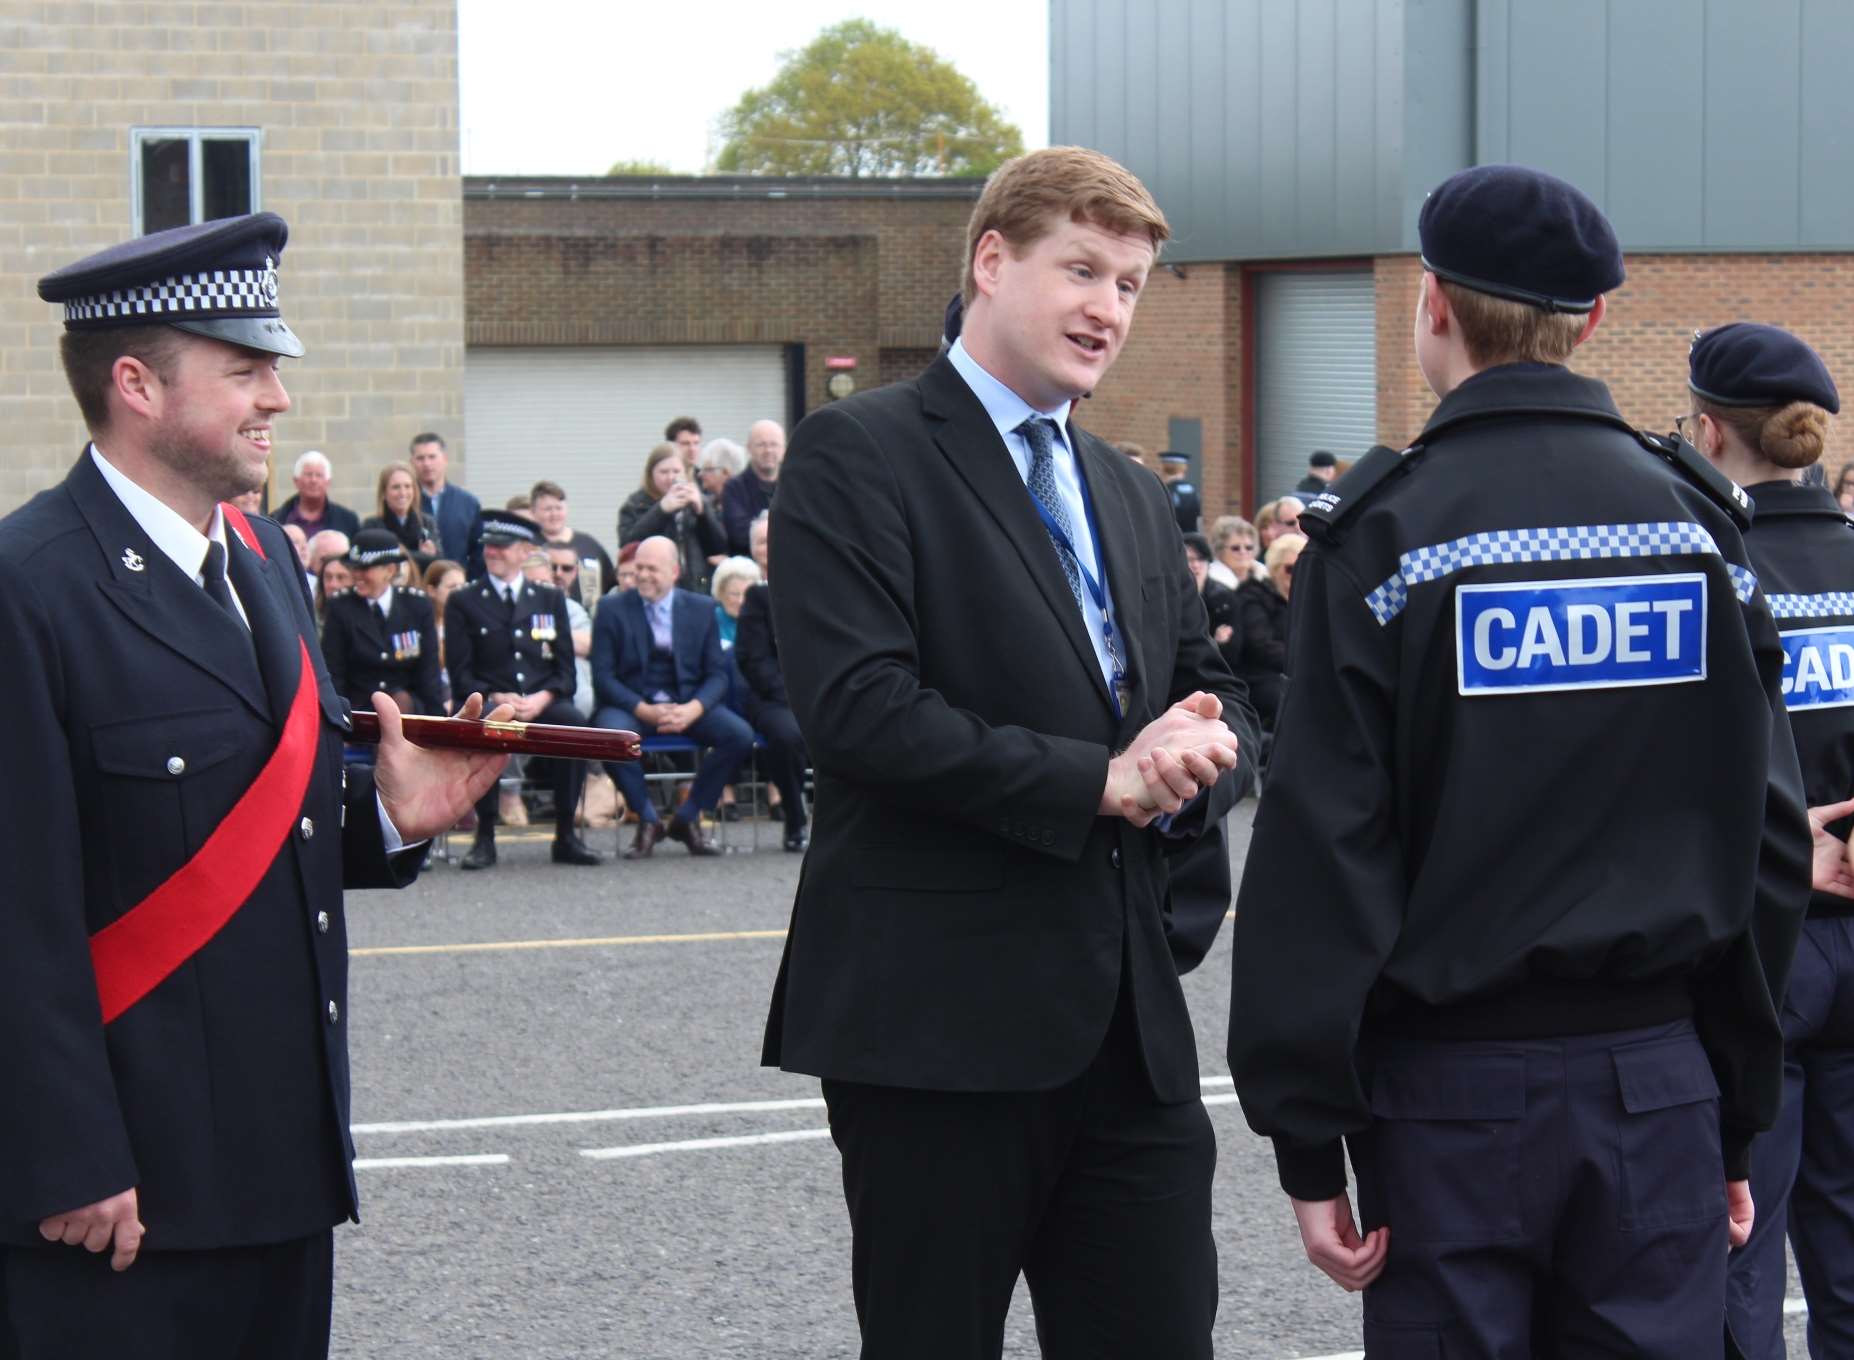 PCC Matthew Scott inspects the new Cadets at their passing out ceremony. Picture: Kent Police